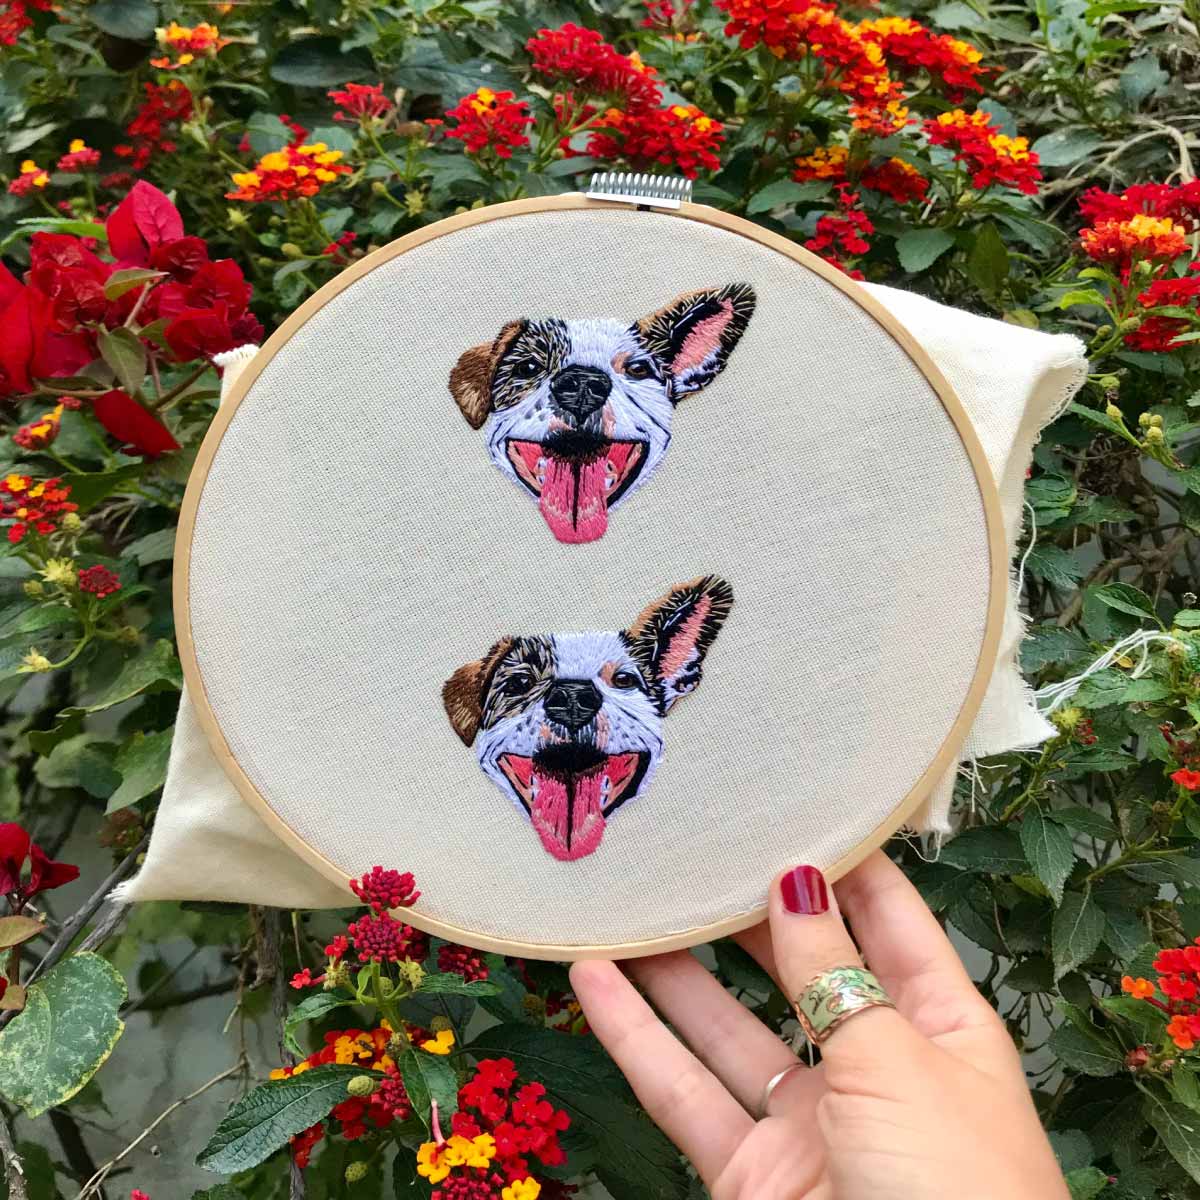 Dog embroidery patterns